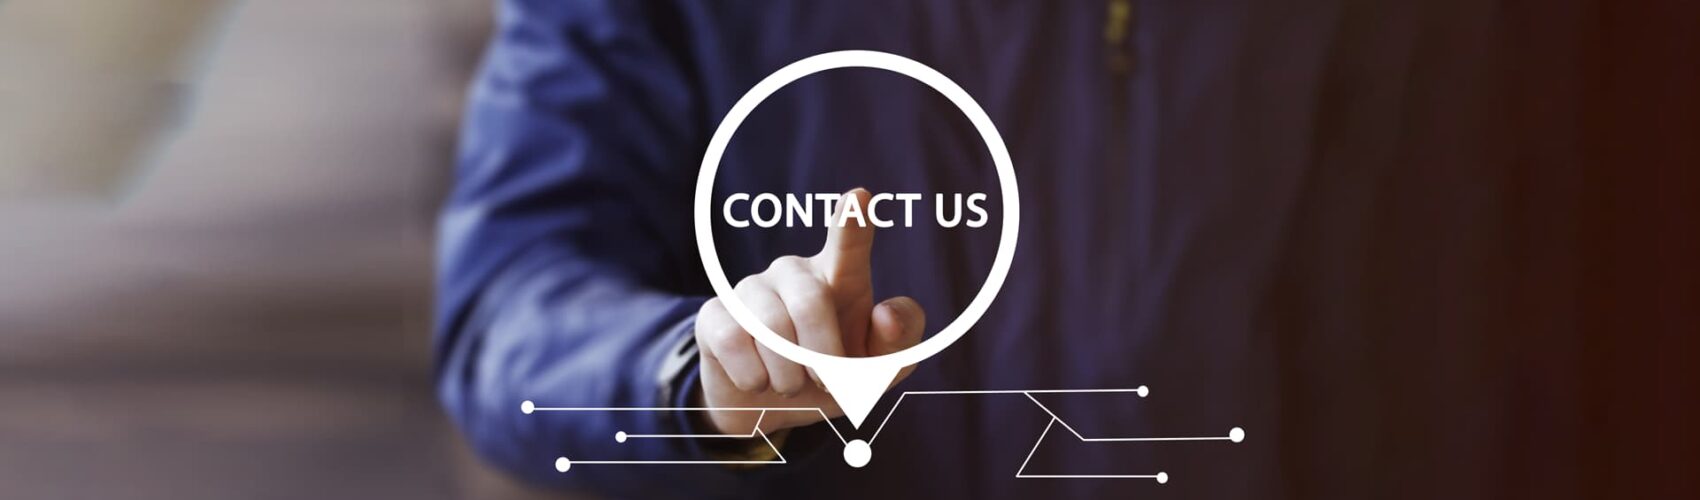 contact-us-page-1700x500